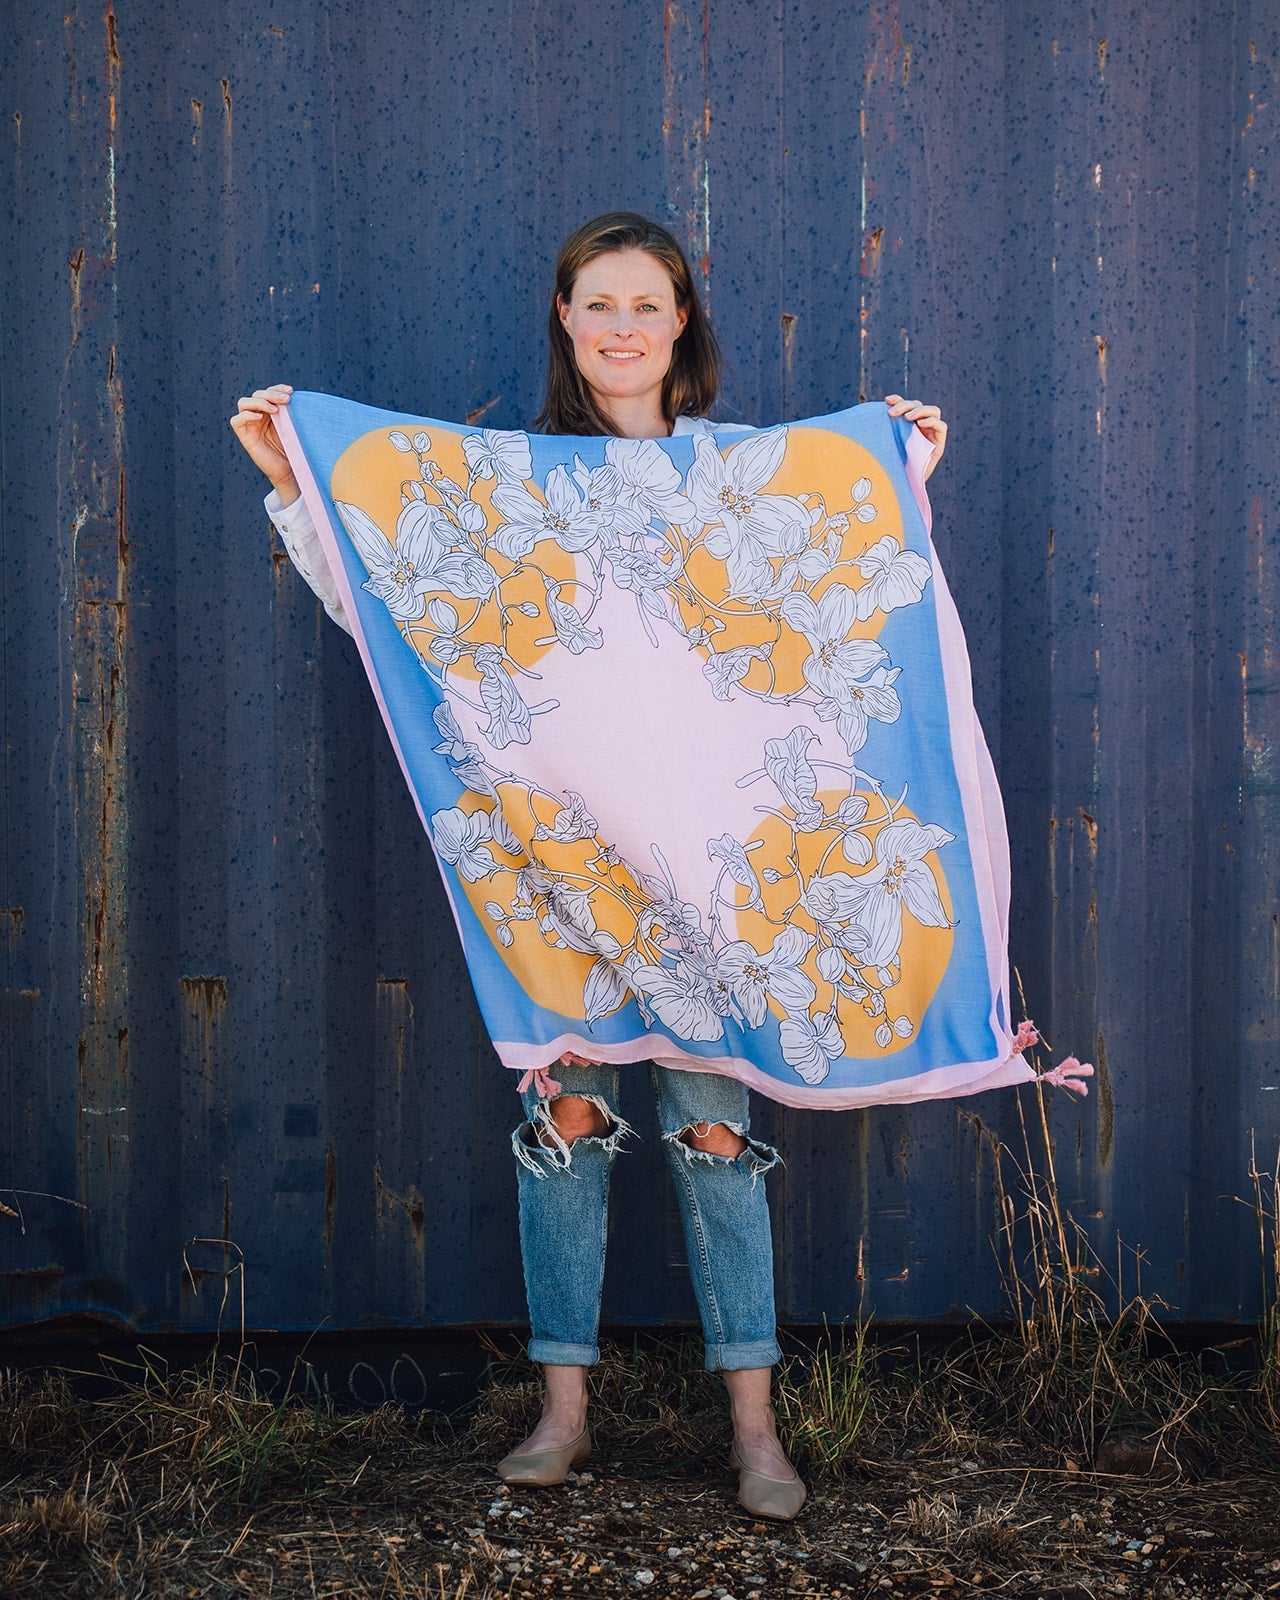 Lily Abstract Floral Women's Scarf: Vibrant abstract design in pink, blue, white, and yellow tones with a whimsical white lily print. Framed with a pretty pink border and finished with playful pink tassels on each corner. Polyester blend for a soft and co